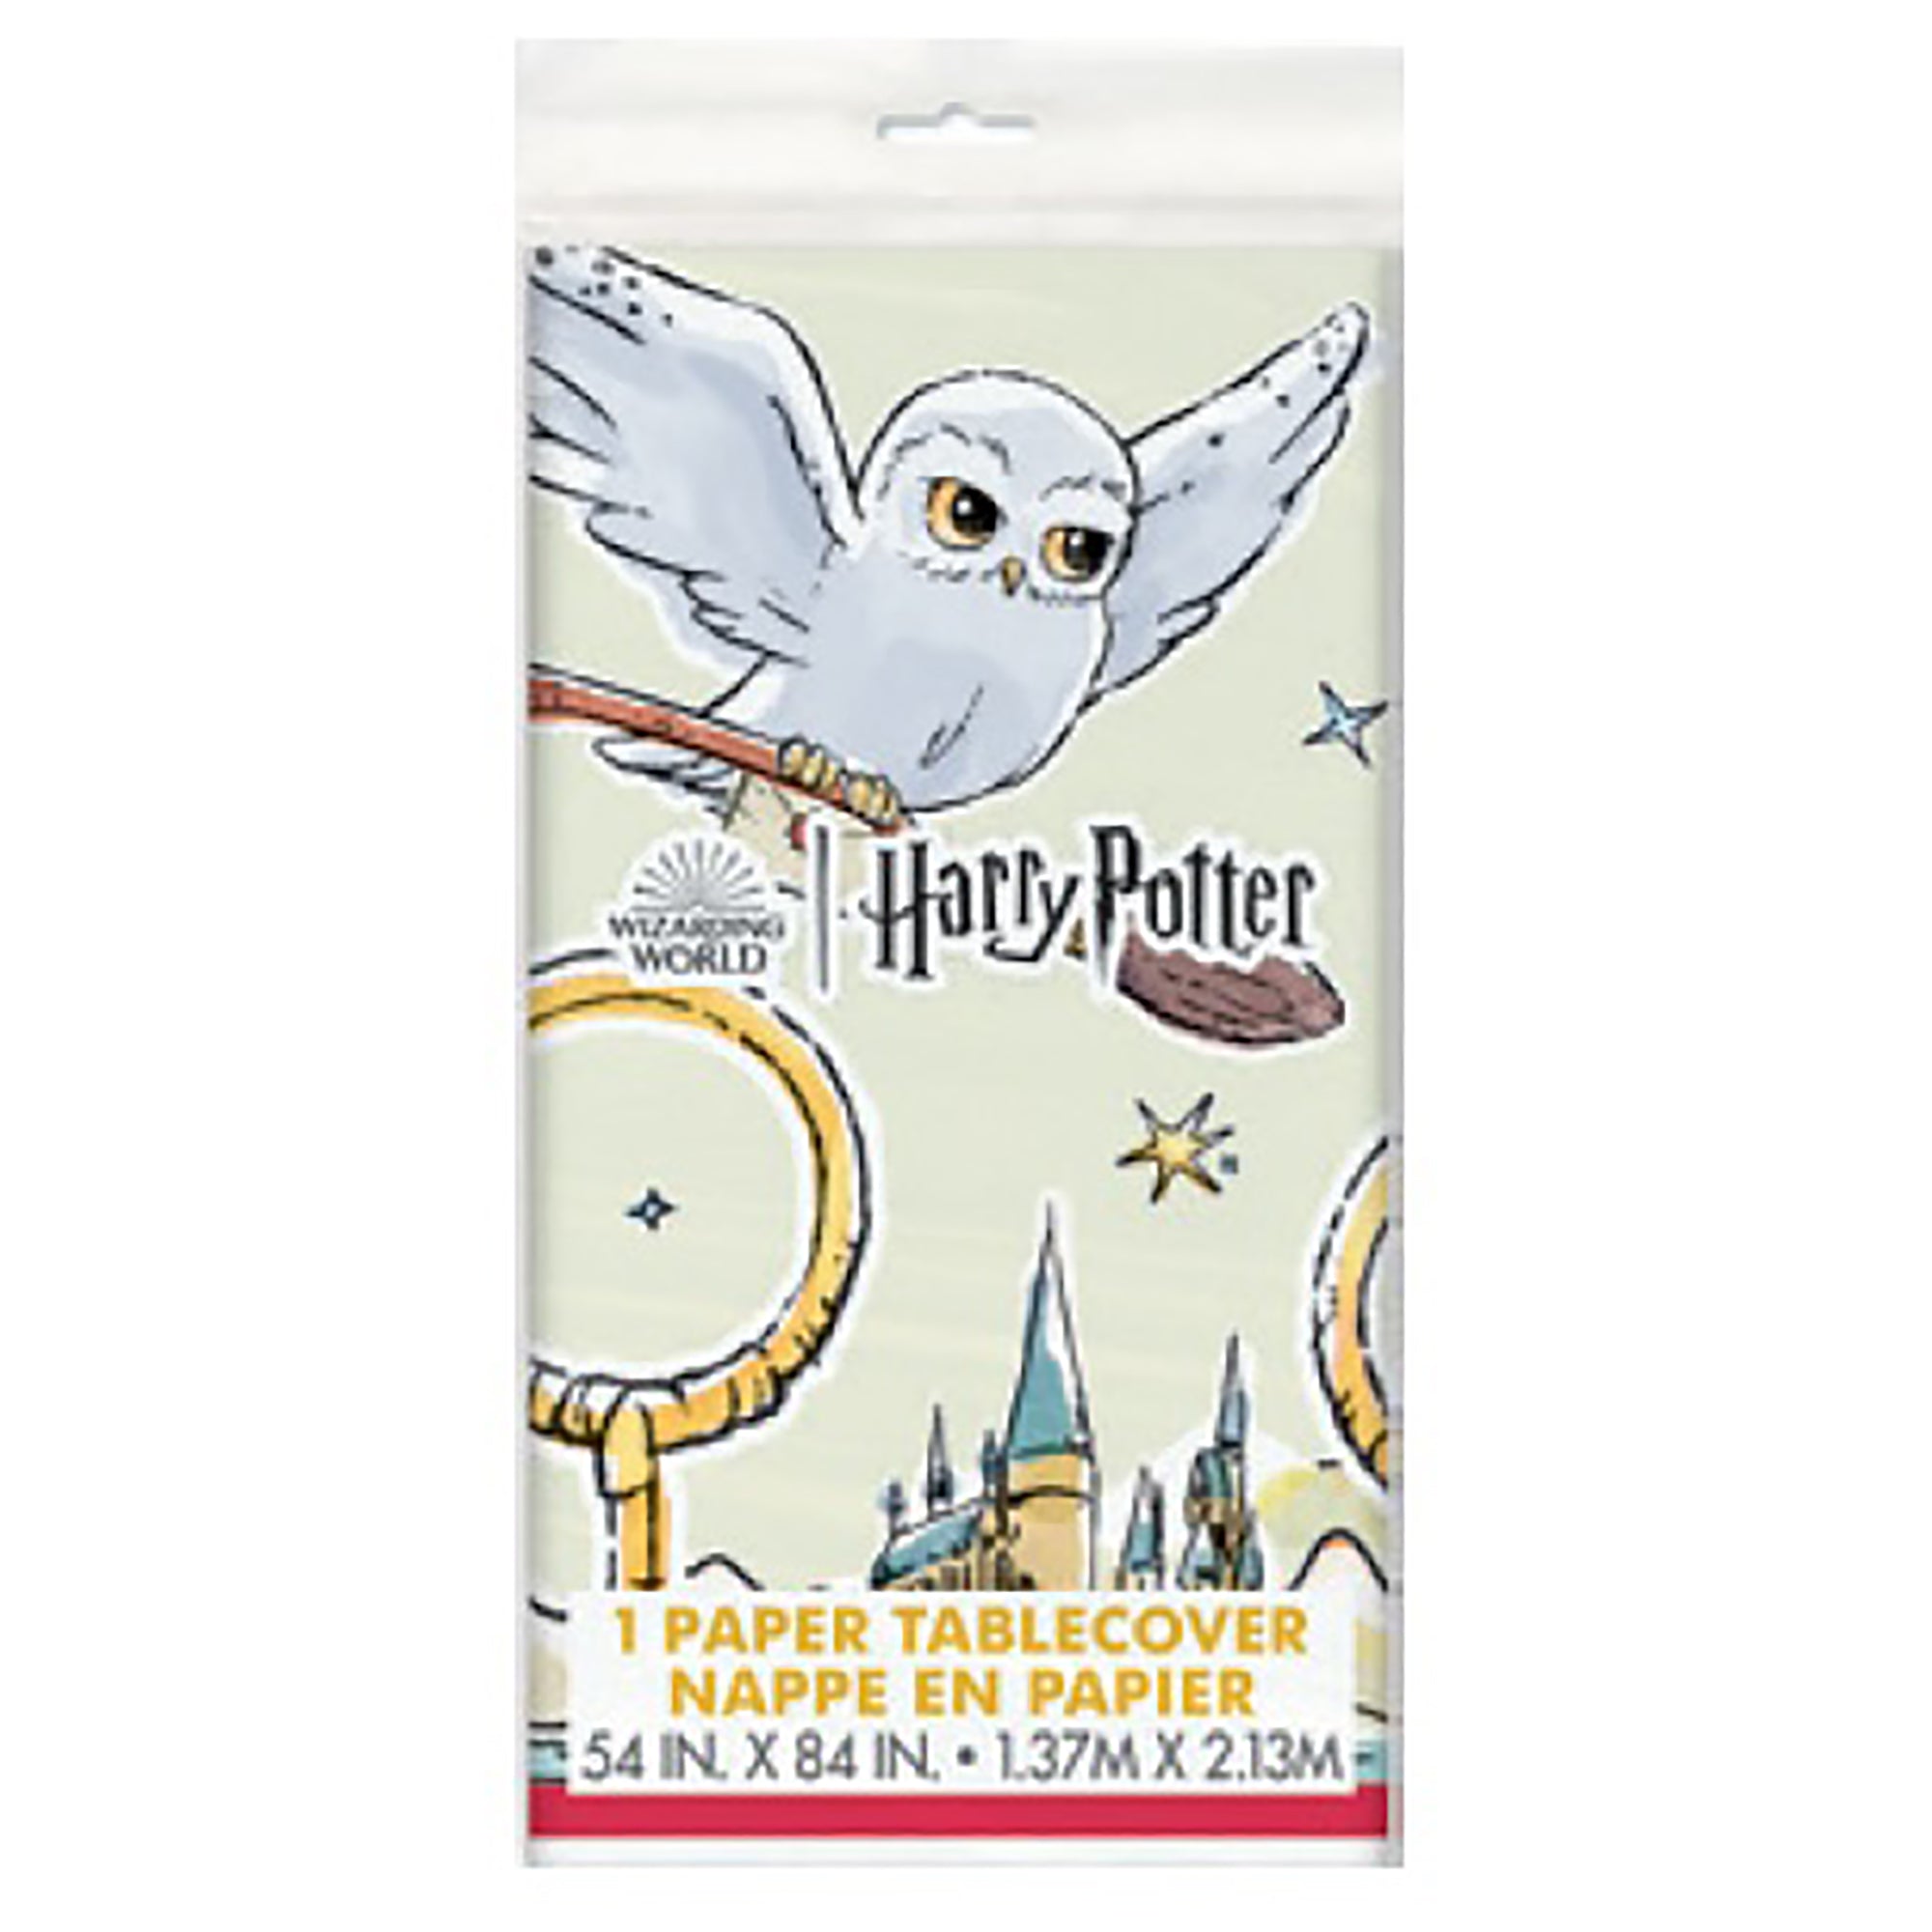 Harry Potter Plastic Table Cover 54x84in